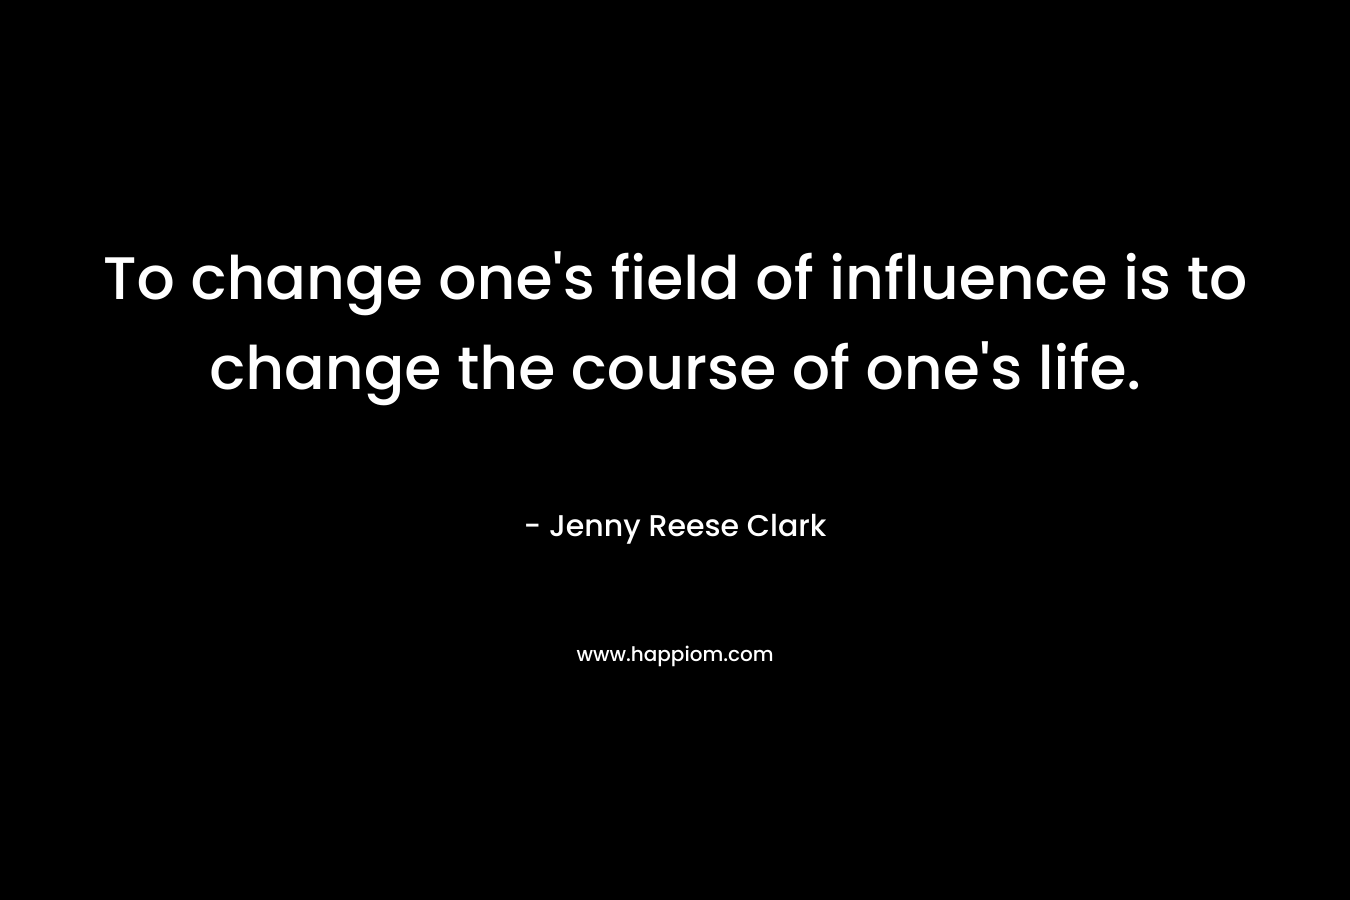 To change one’s field of influence is to change the course of one’s life. – Jenny Reese Clark